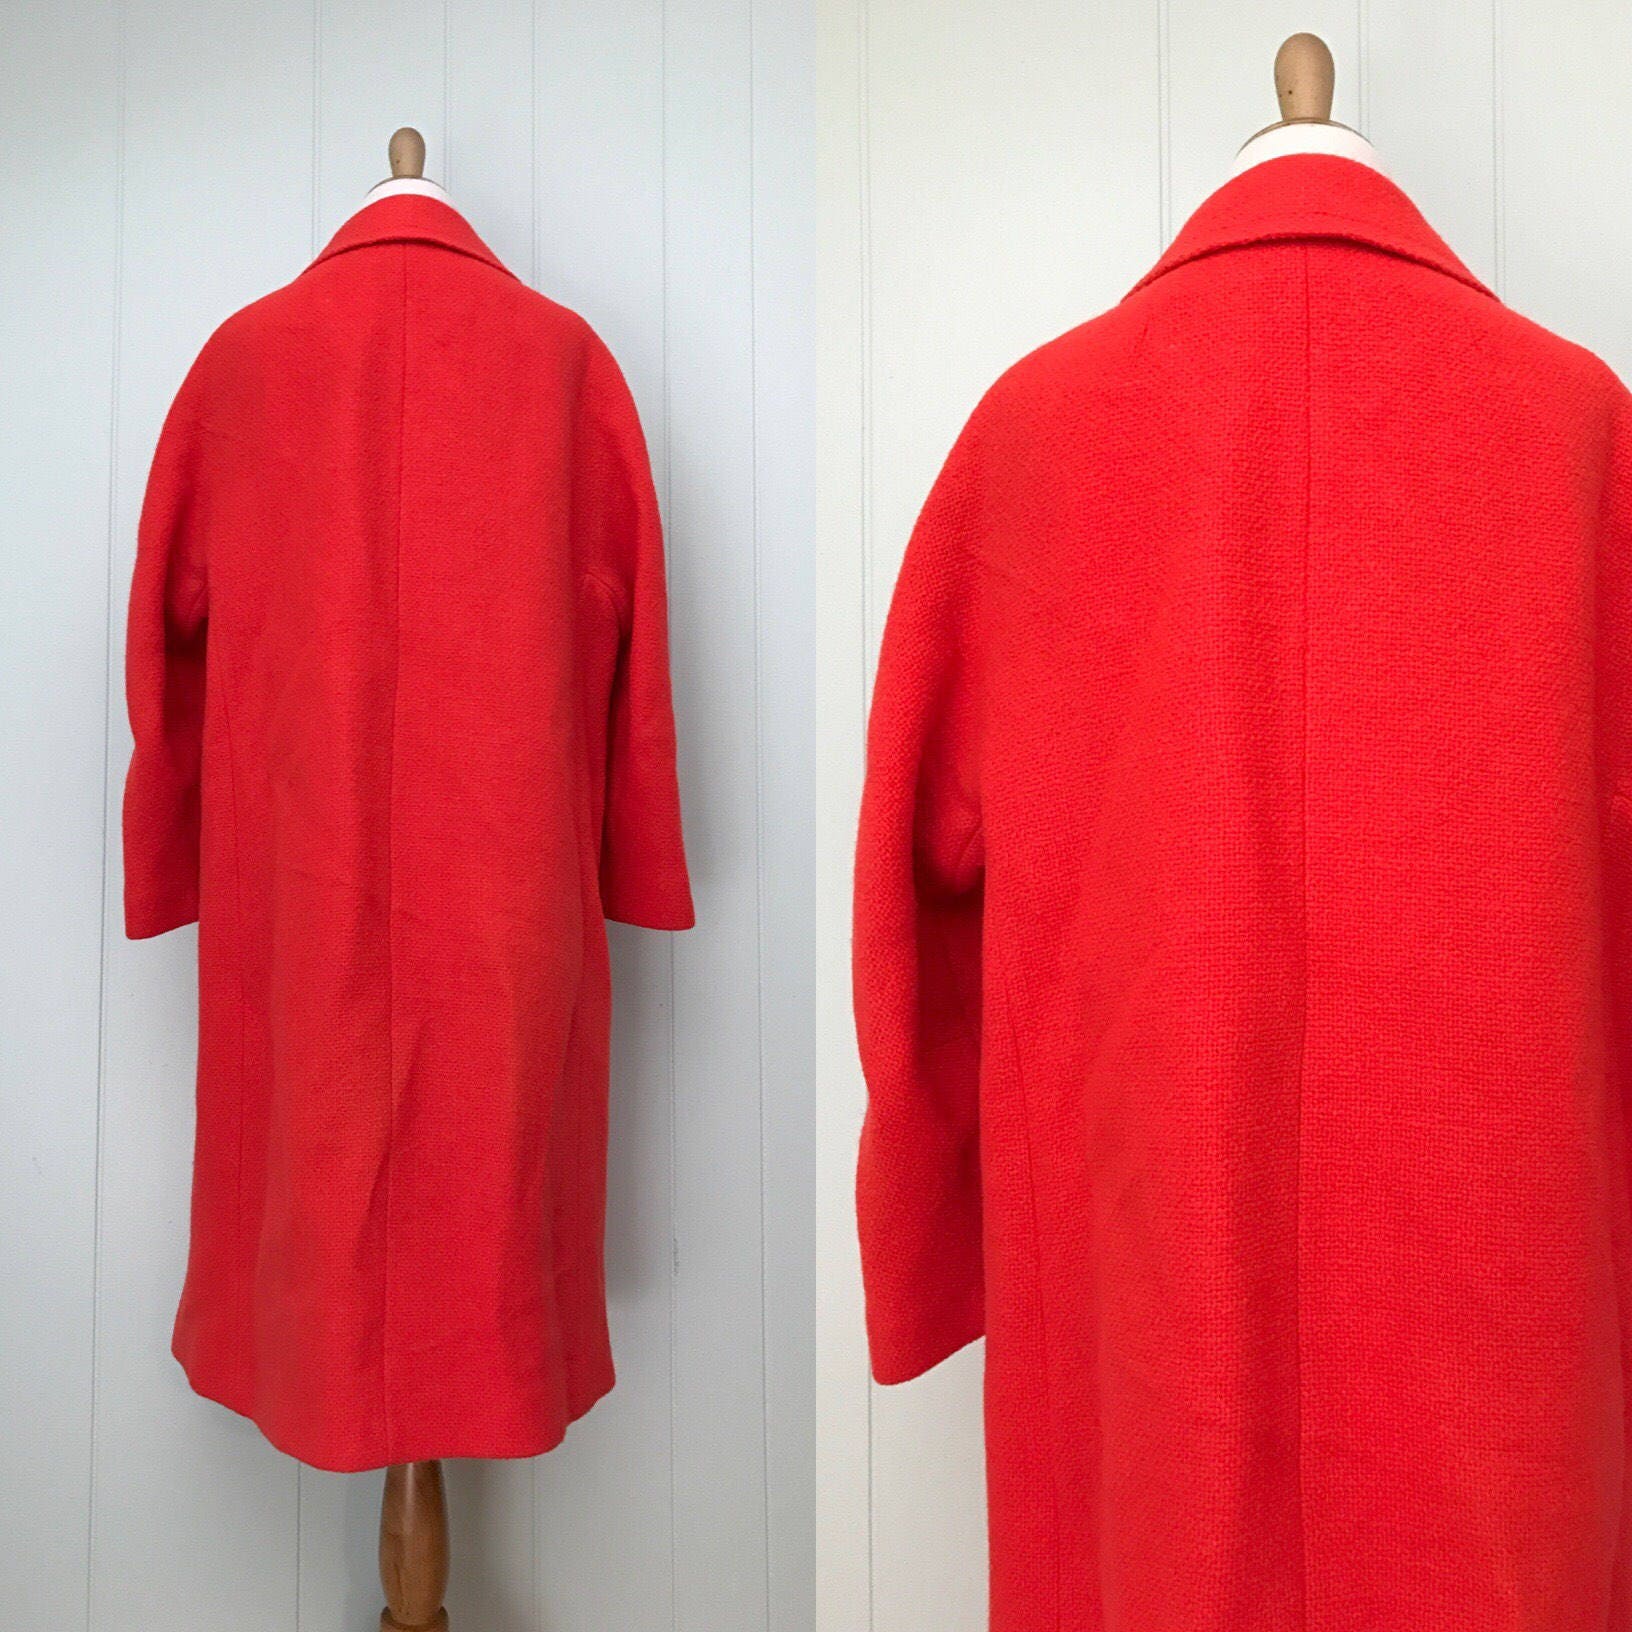 1960s Youthcraft Bright Coral Wool Coat 60s Pink Orange Long | Etsy